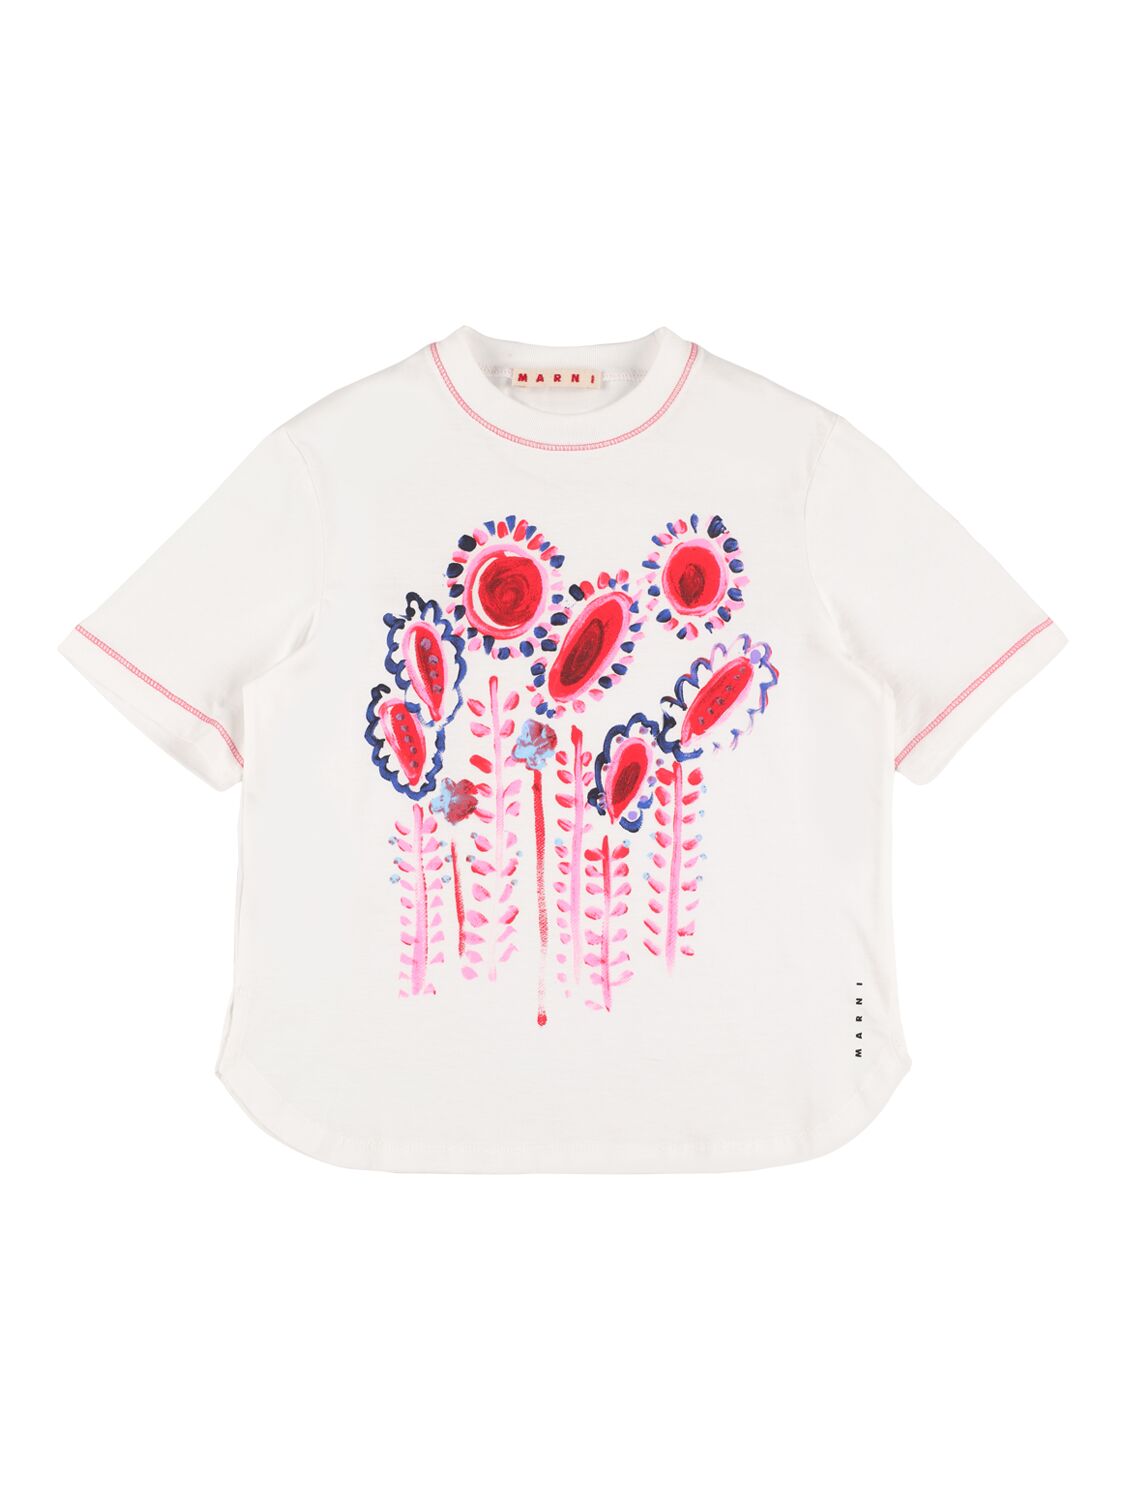 Image of Floral Printed Cotton T-shirt